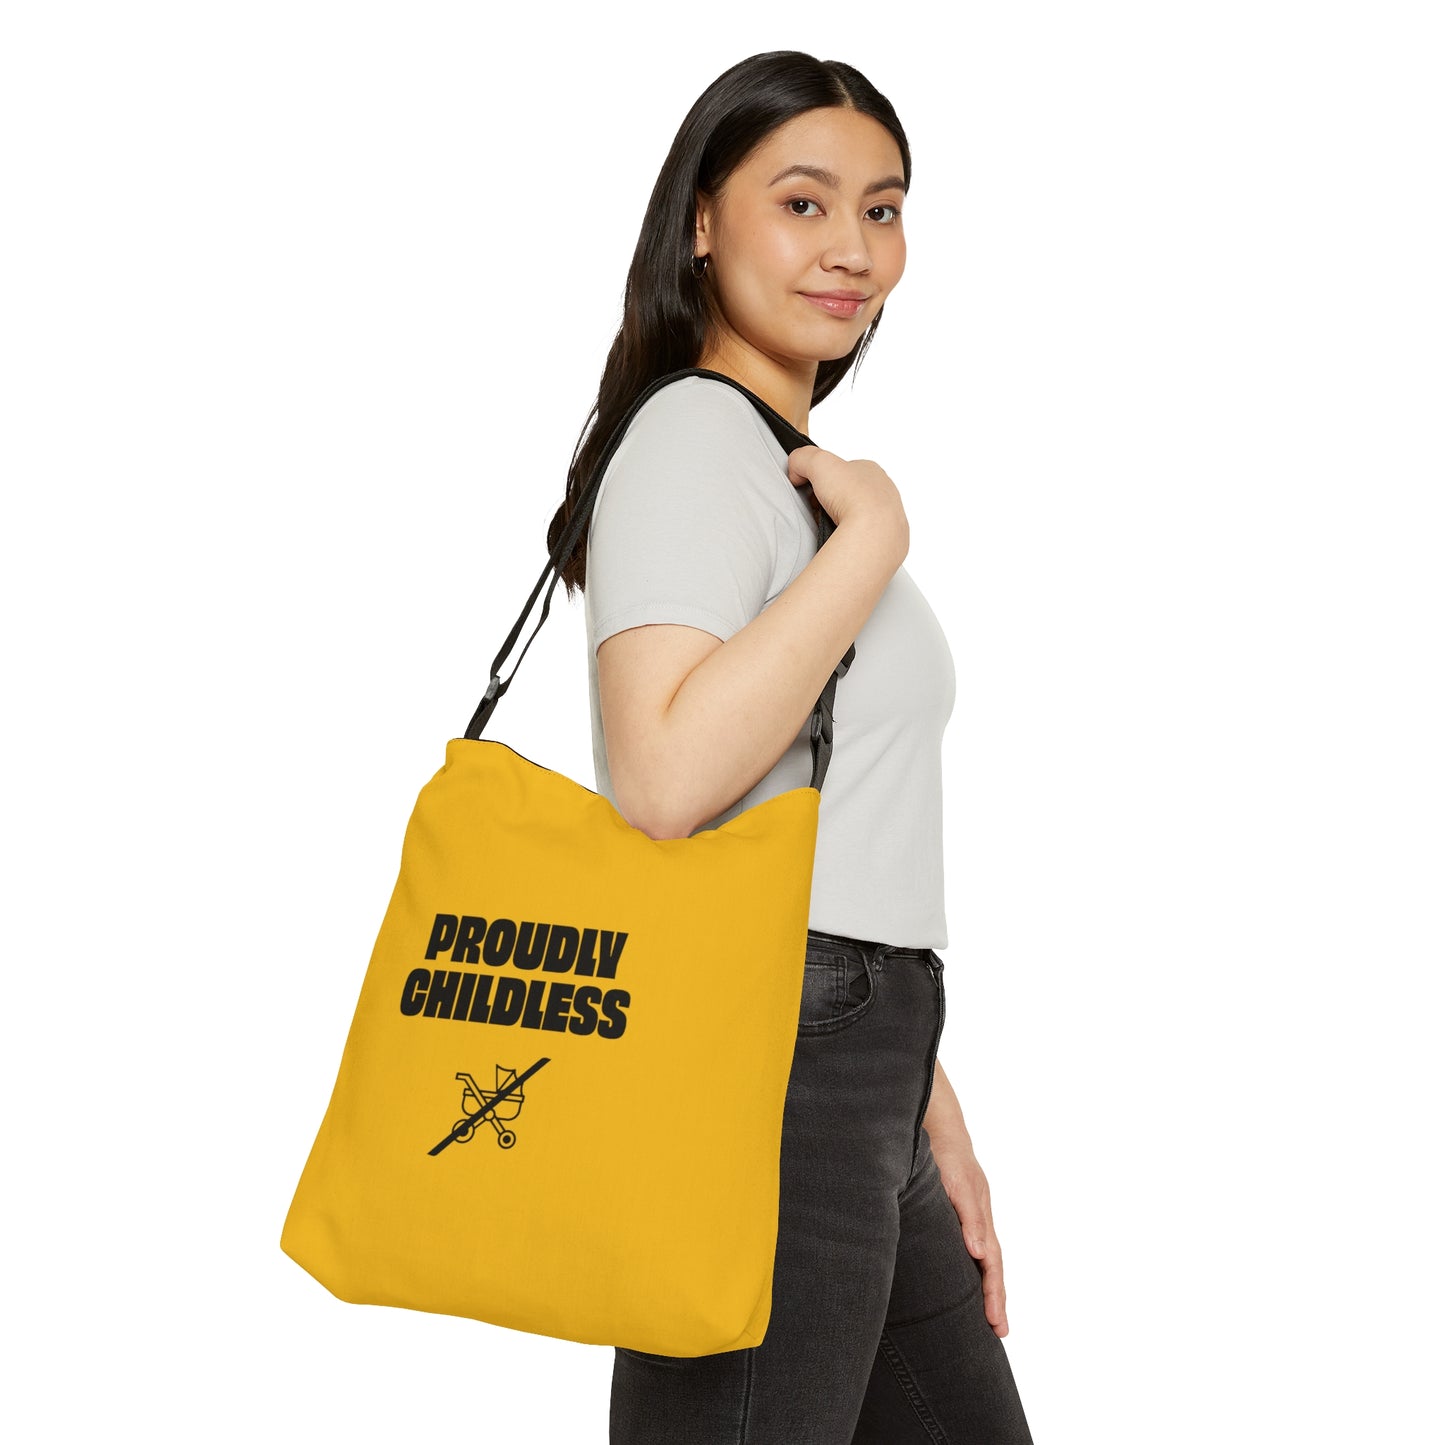 Proudly Childless Adjustable Tote Bag